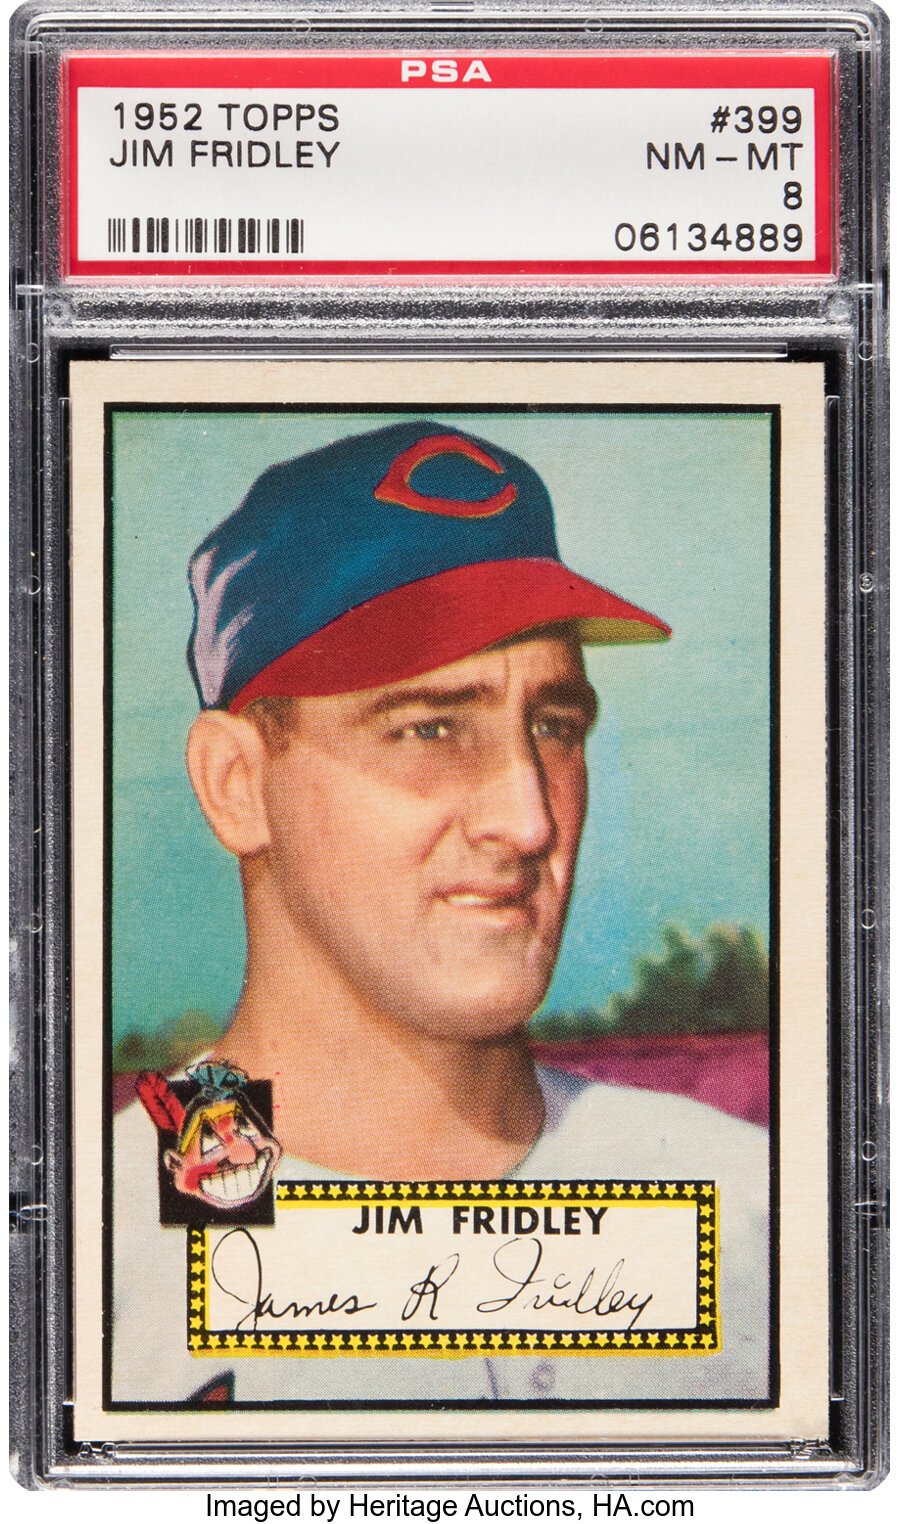 1952 Topps Jim Fridley Rookie #399 PSA NM-MT 8 - Four Higher!